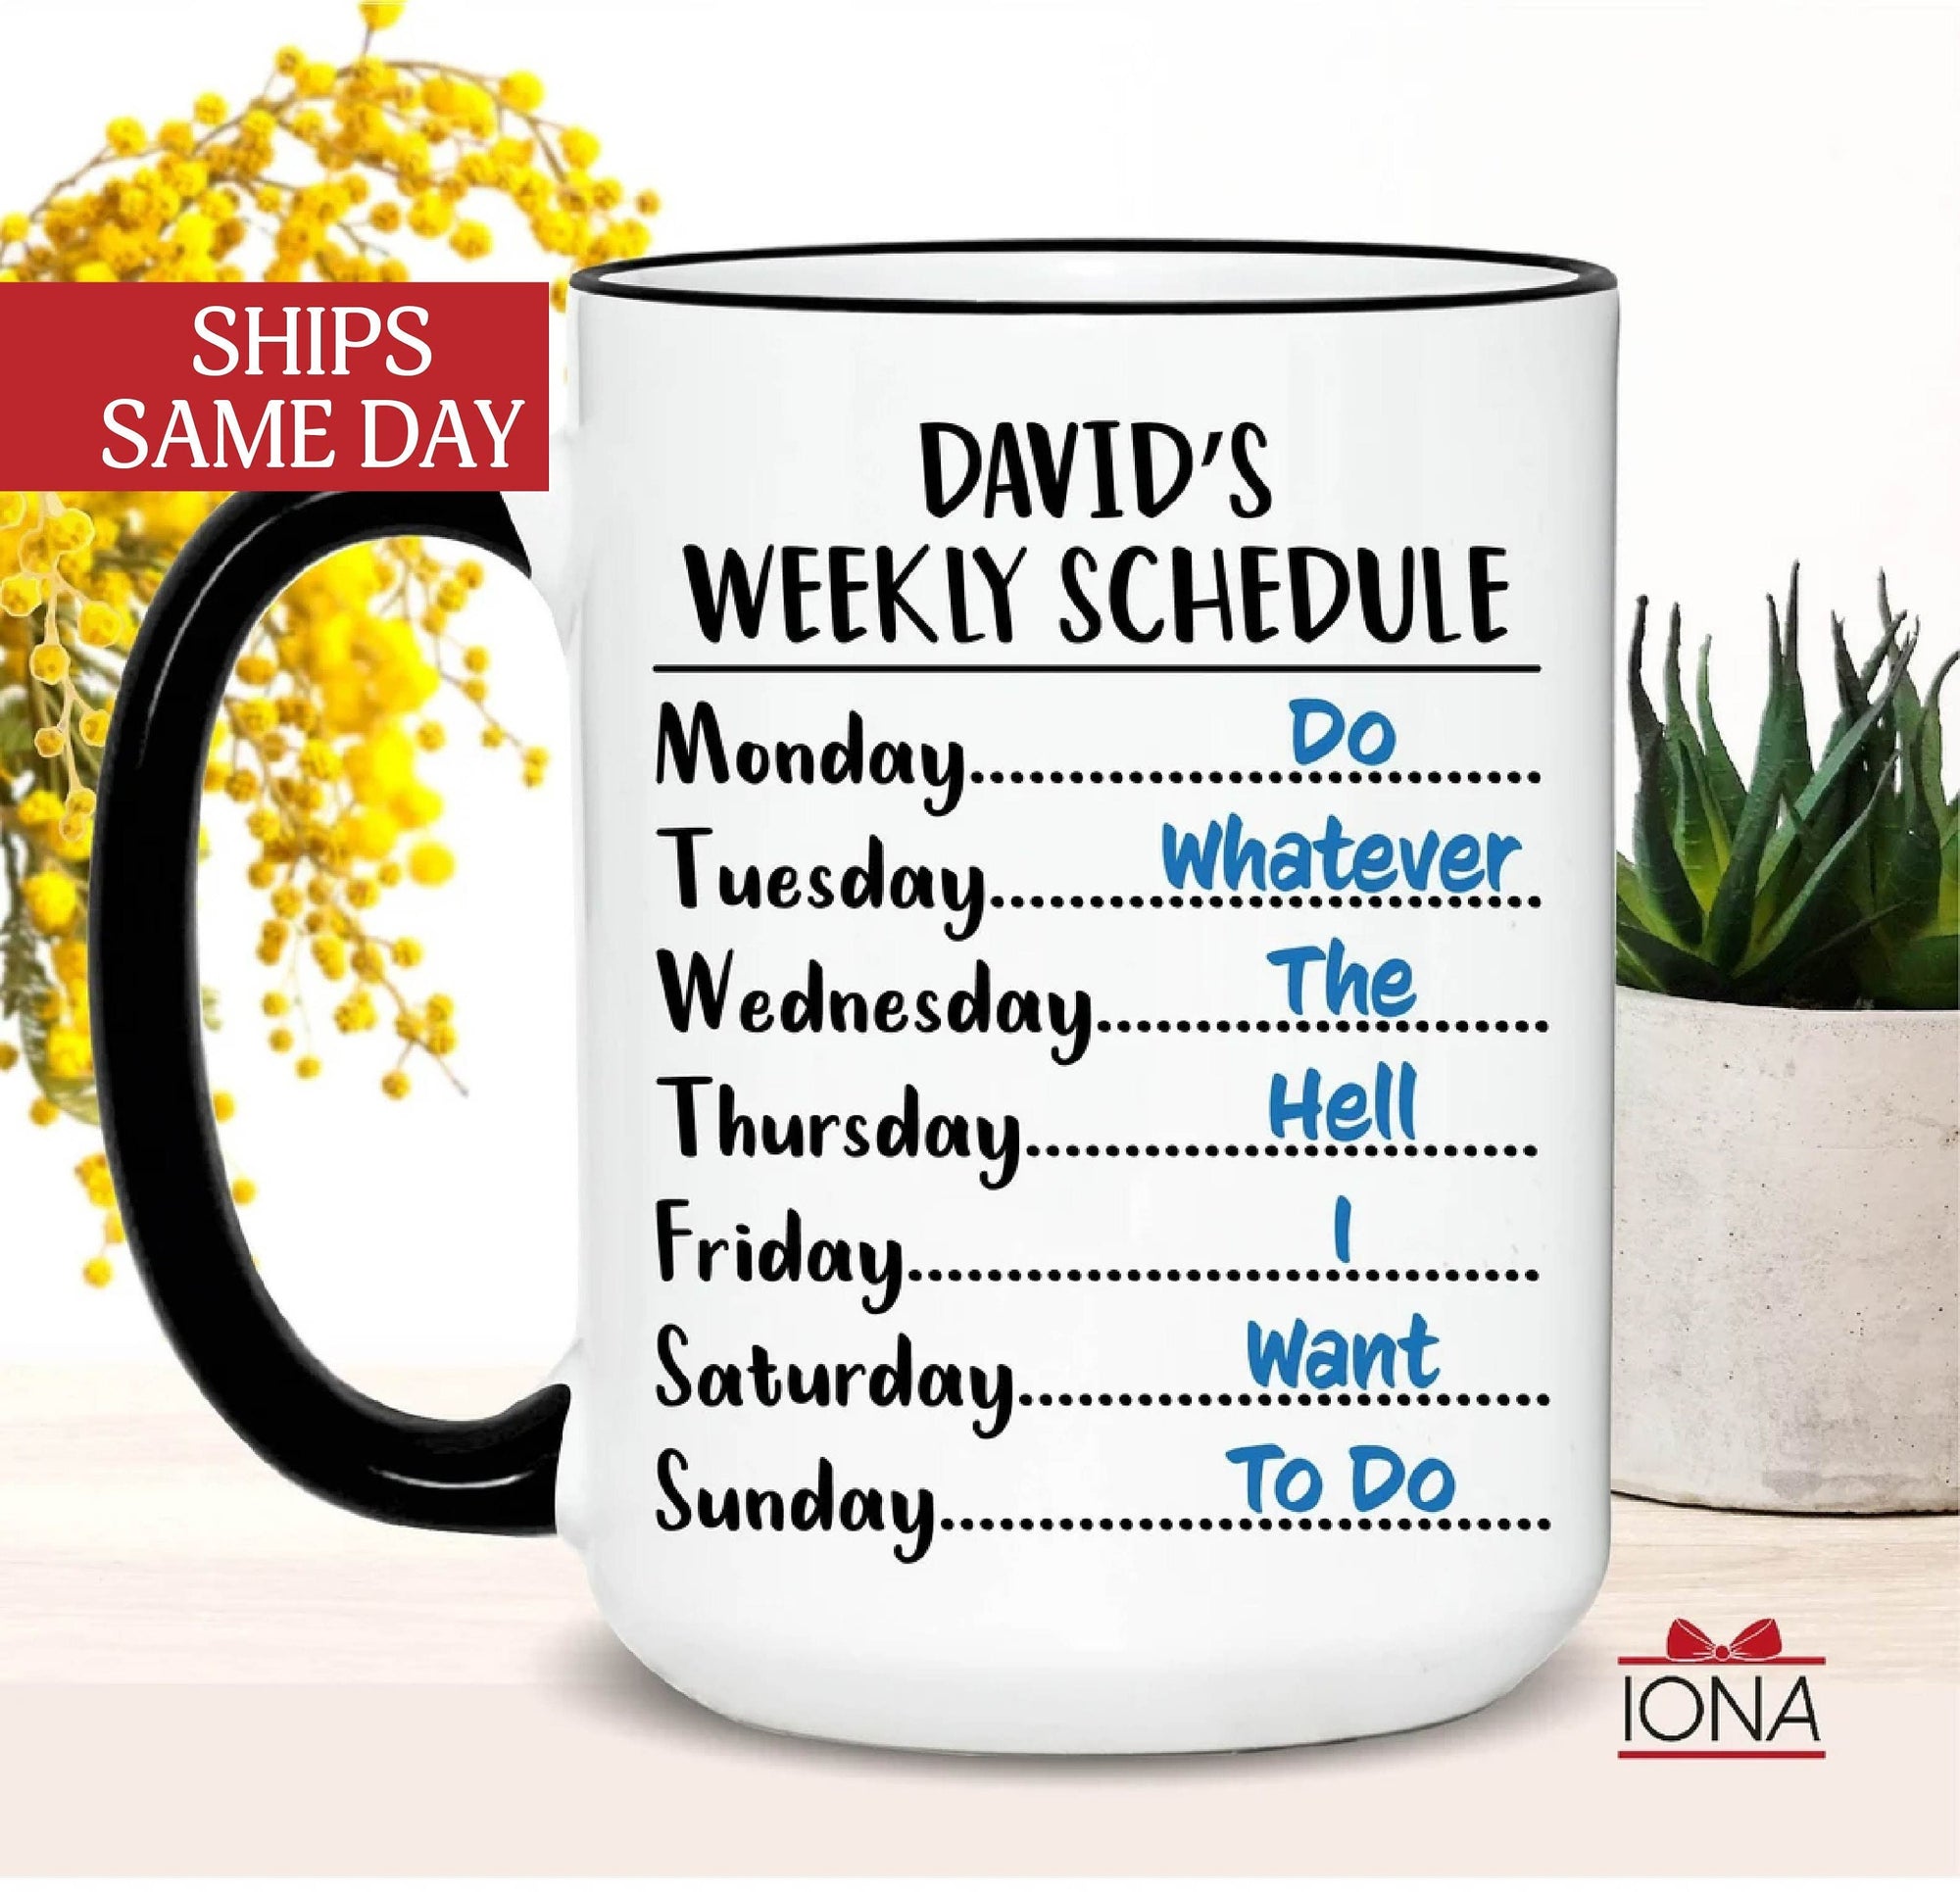 Retirement Gifts for Men - Weekly Schedule mug - Funny Retirement Gift for Men from Coworkers, Men Retirement Gifts, Happy Retirement Mug